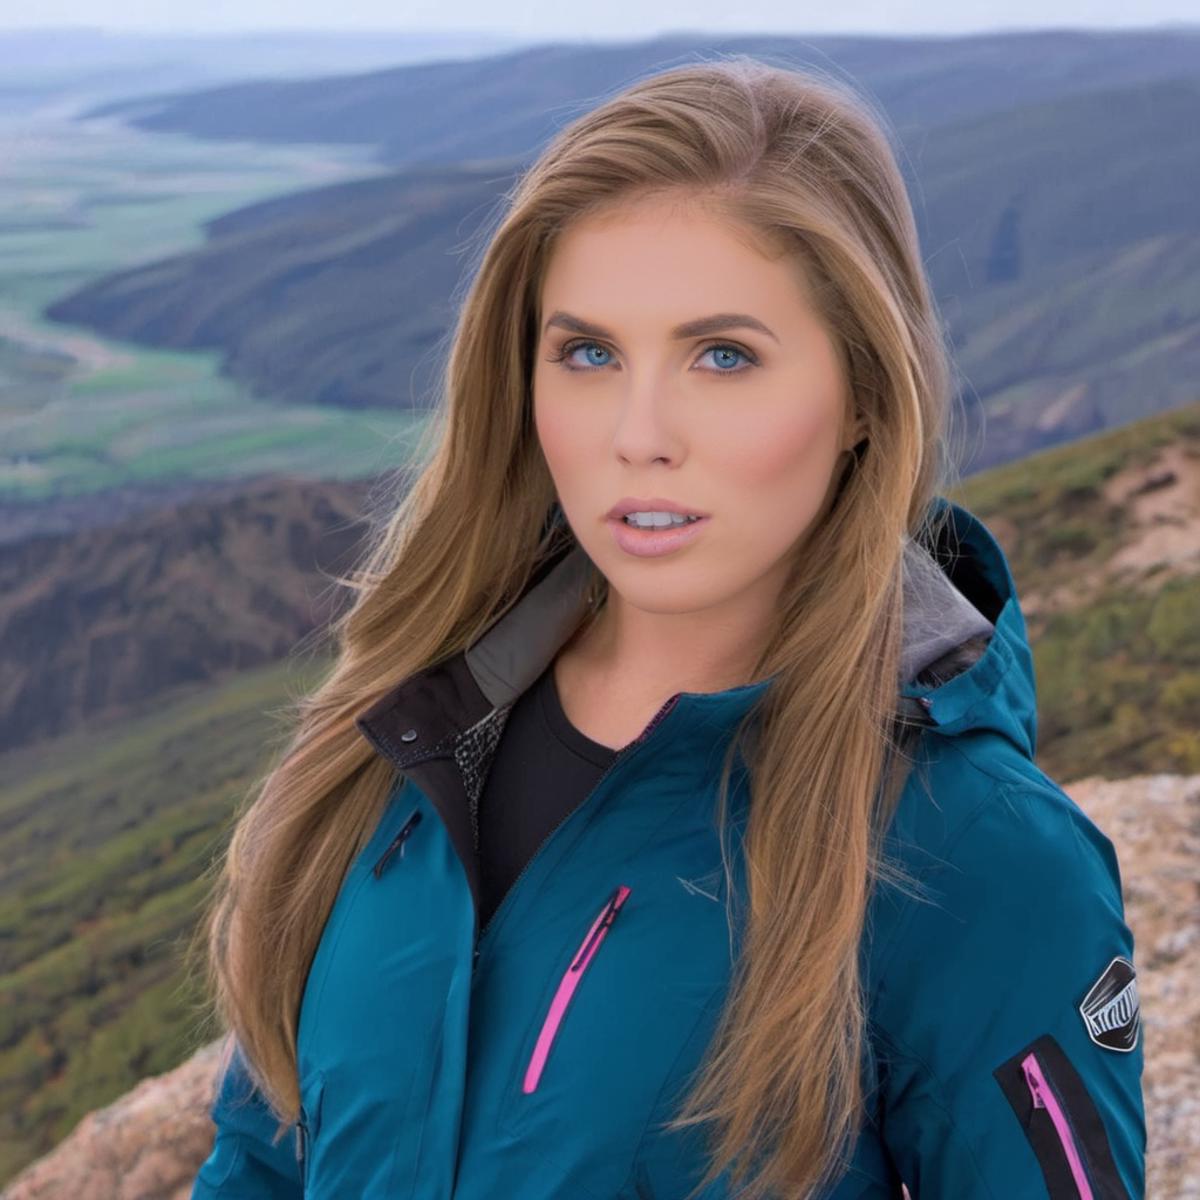 A Young Woman with Blue Eyes and Blonde Hair Wearing a Blue Jacket and Pink Stripe Posing on a Mountain Top.